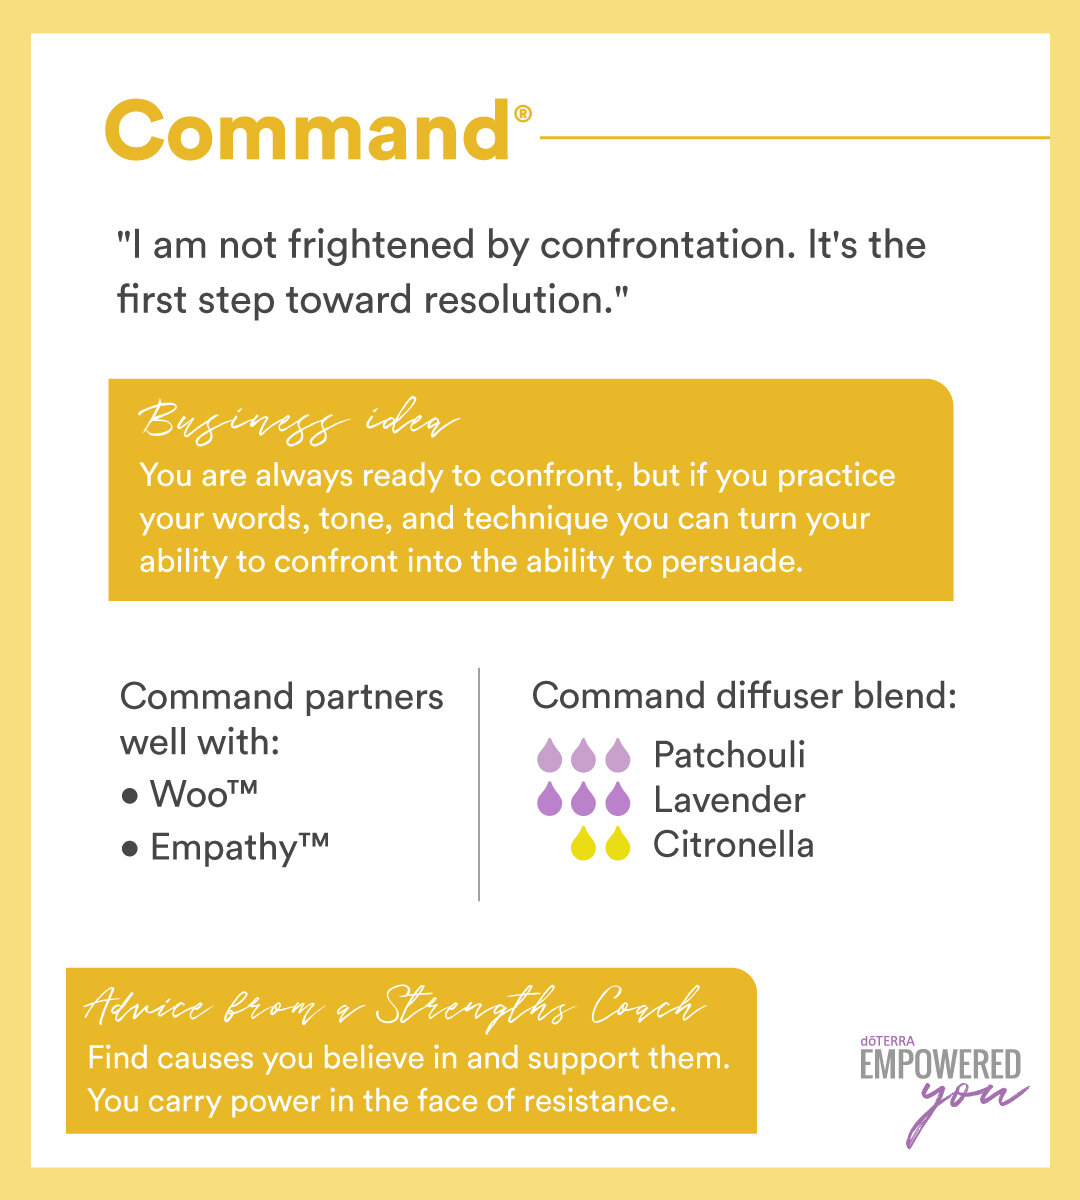 Strengths and oils-insight-Command.jpg